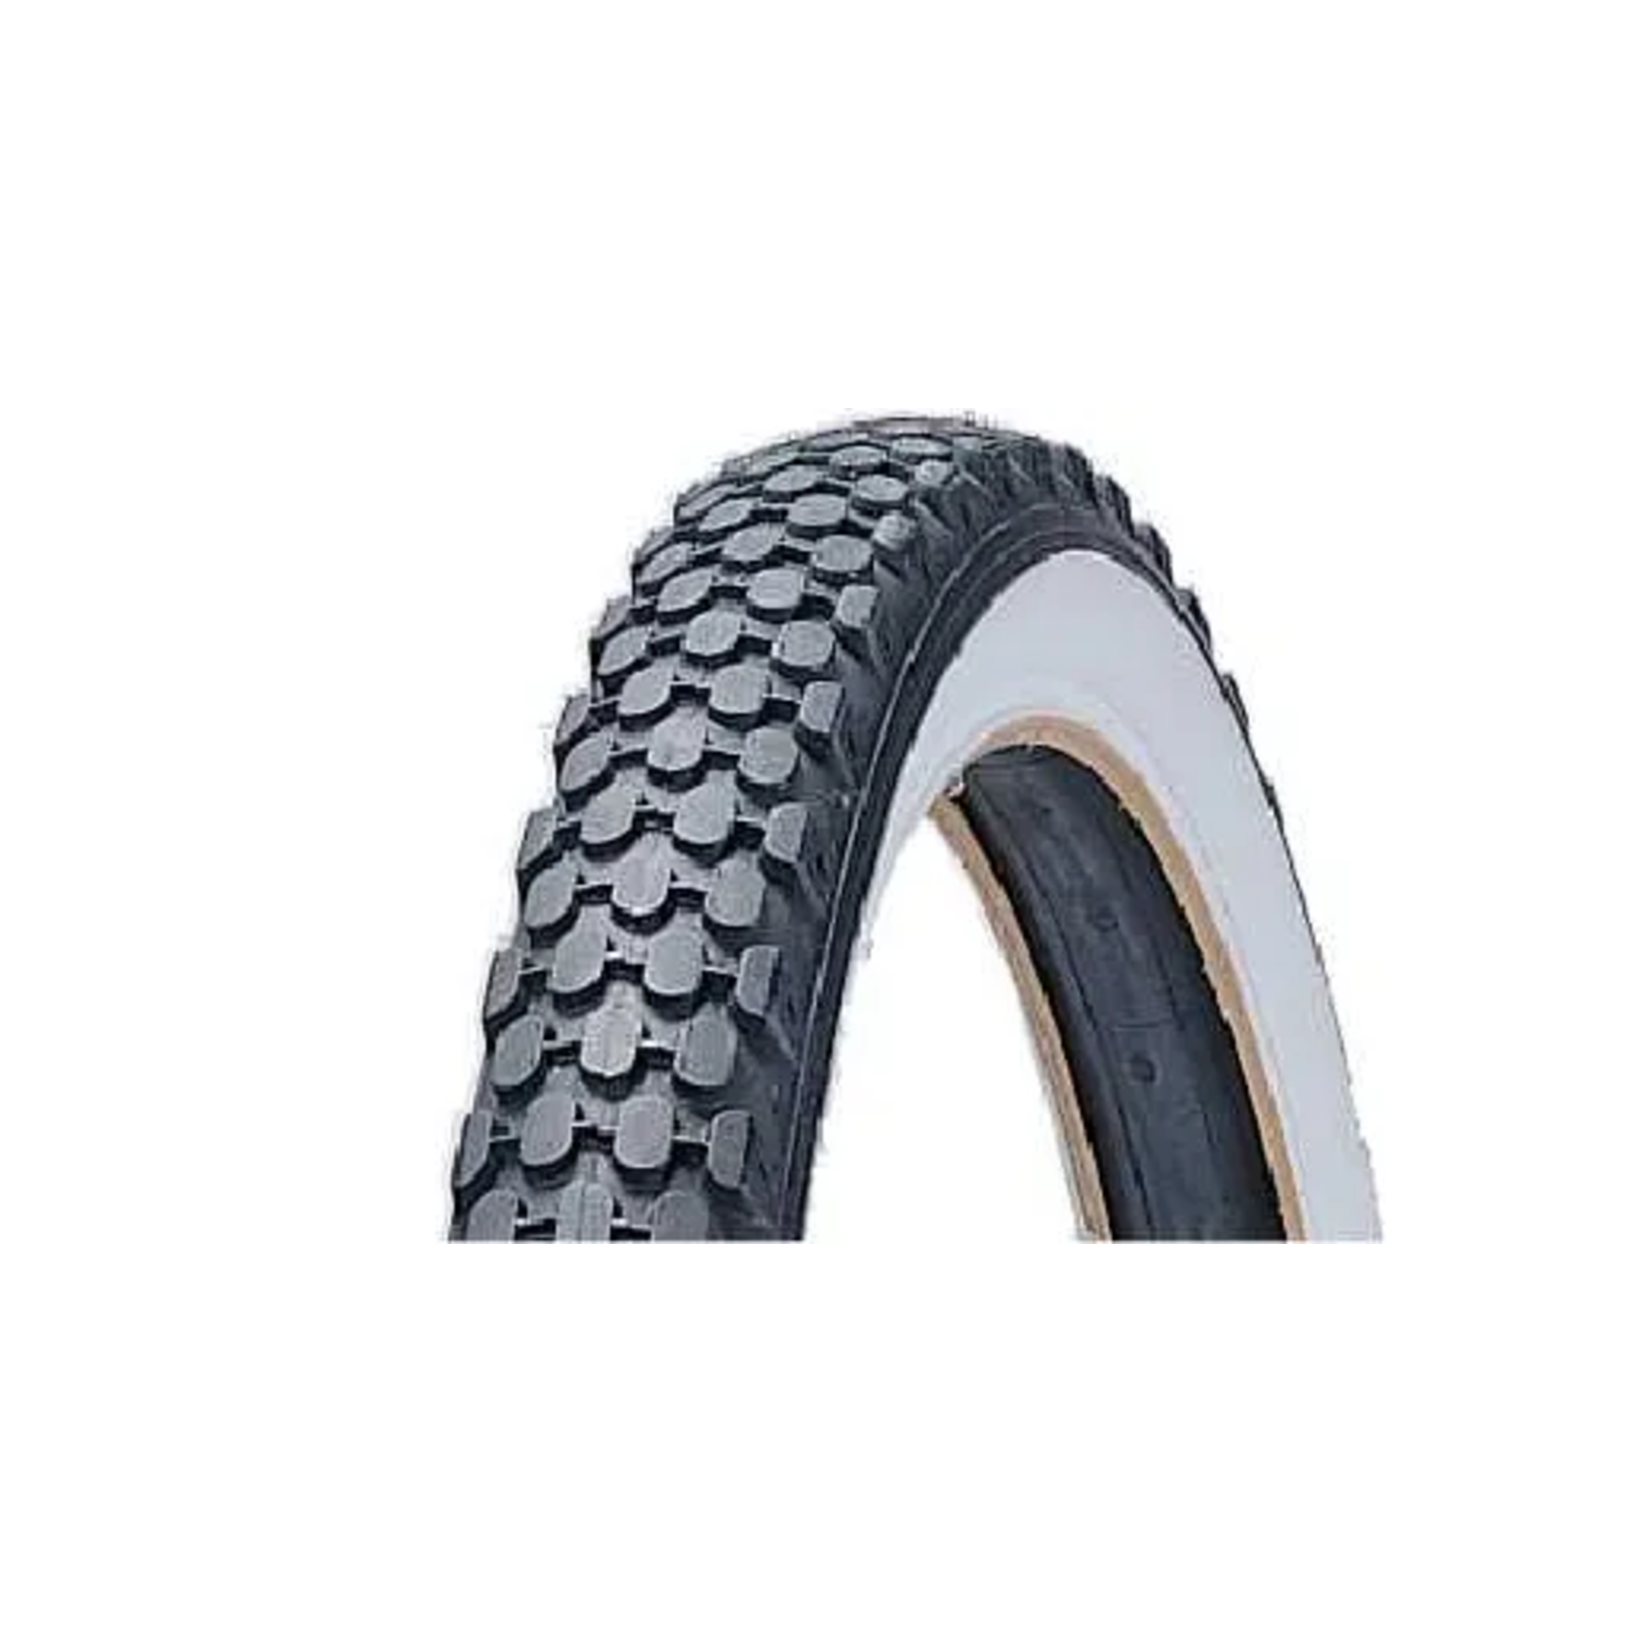 Duro Duro Bicycle Tyre - 24 X 2.125 - Black With White/Wall, Cruiser - Pair